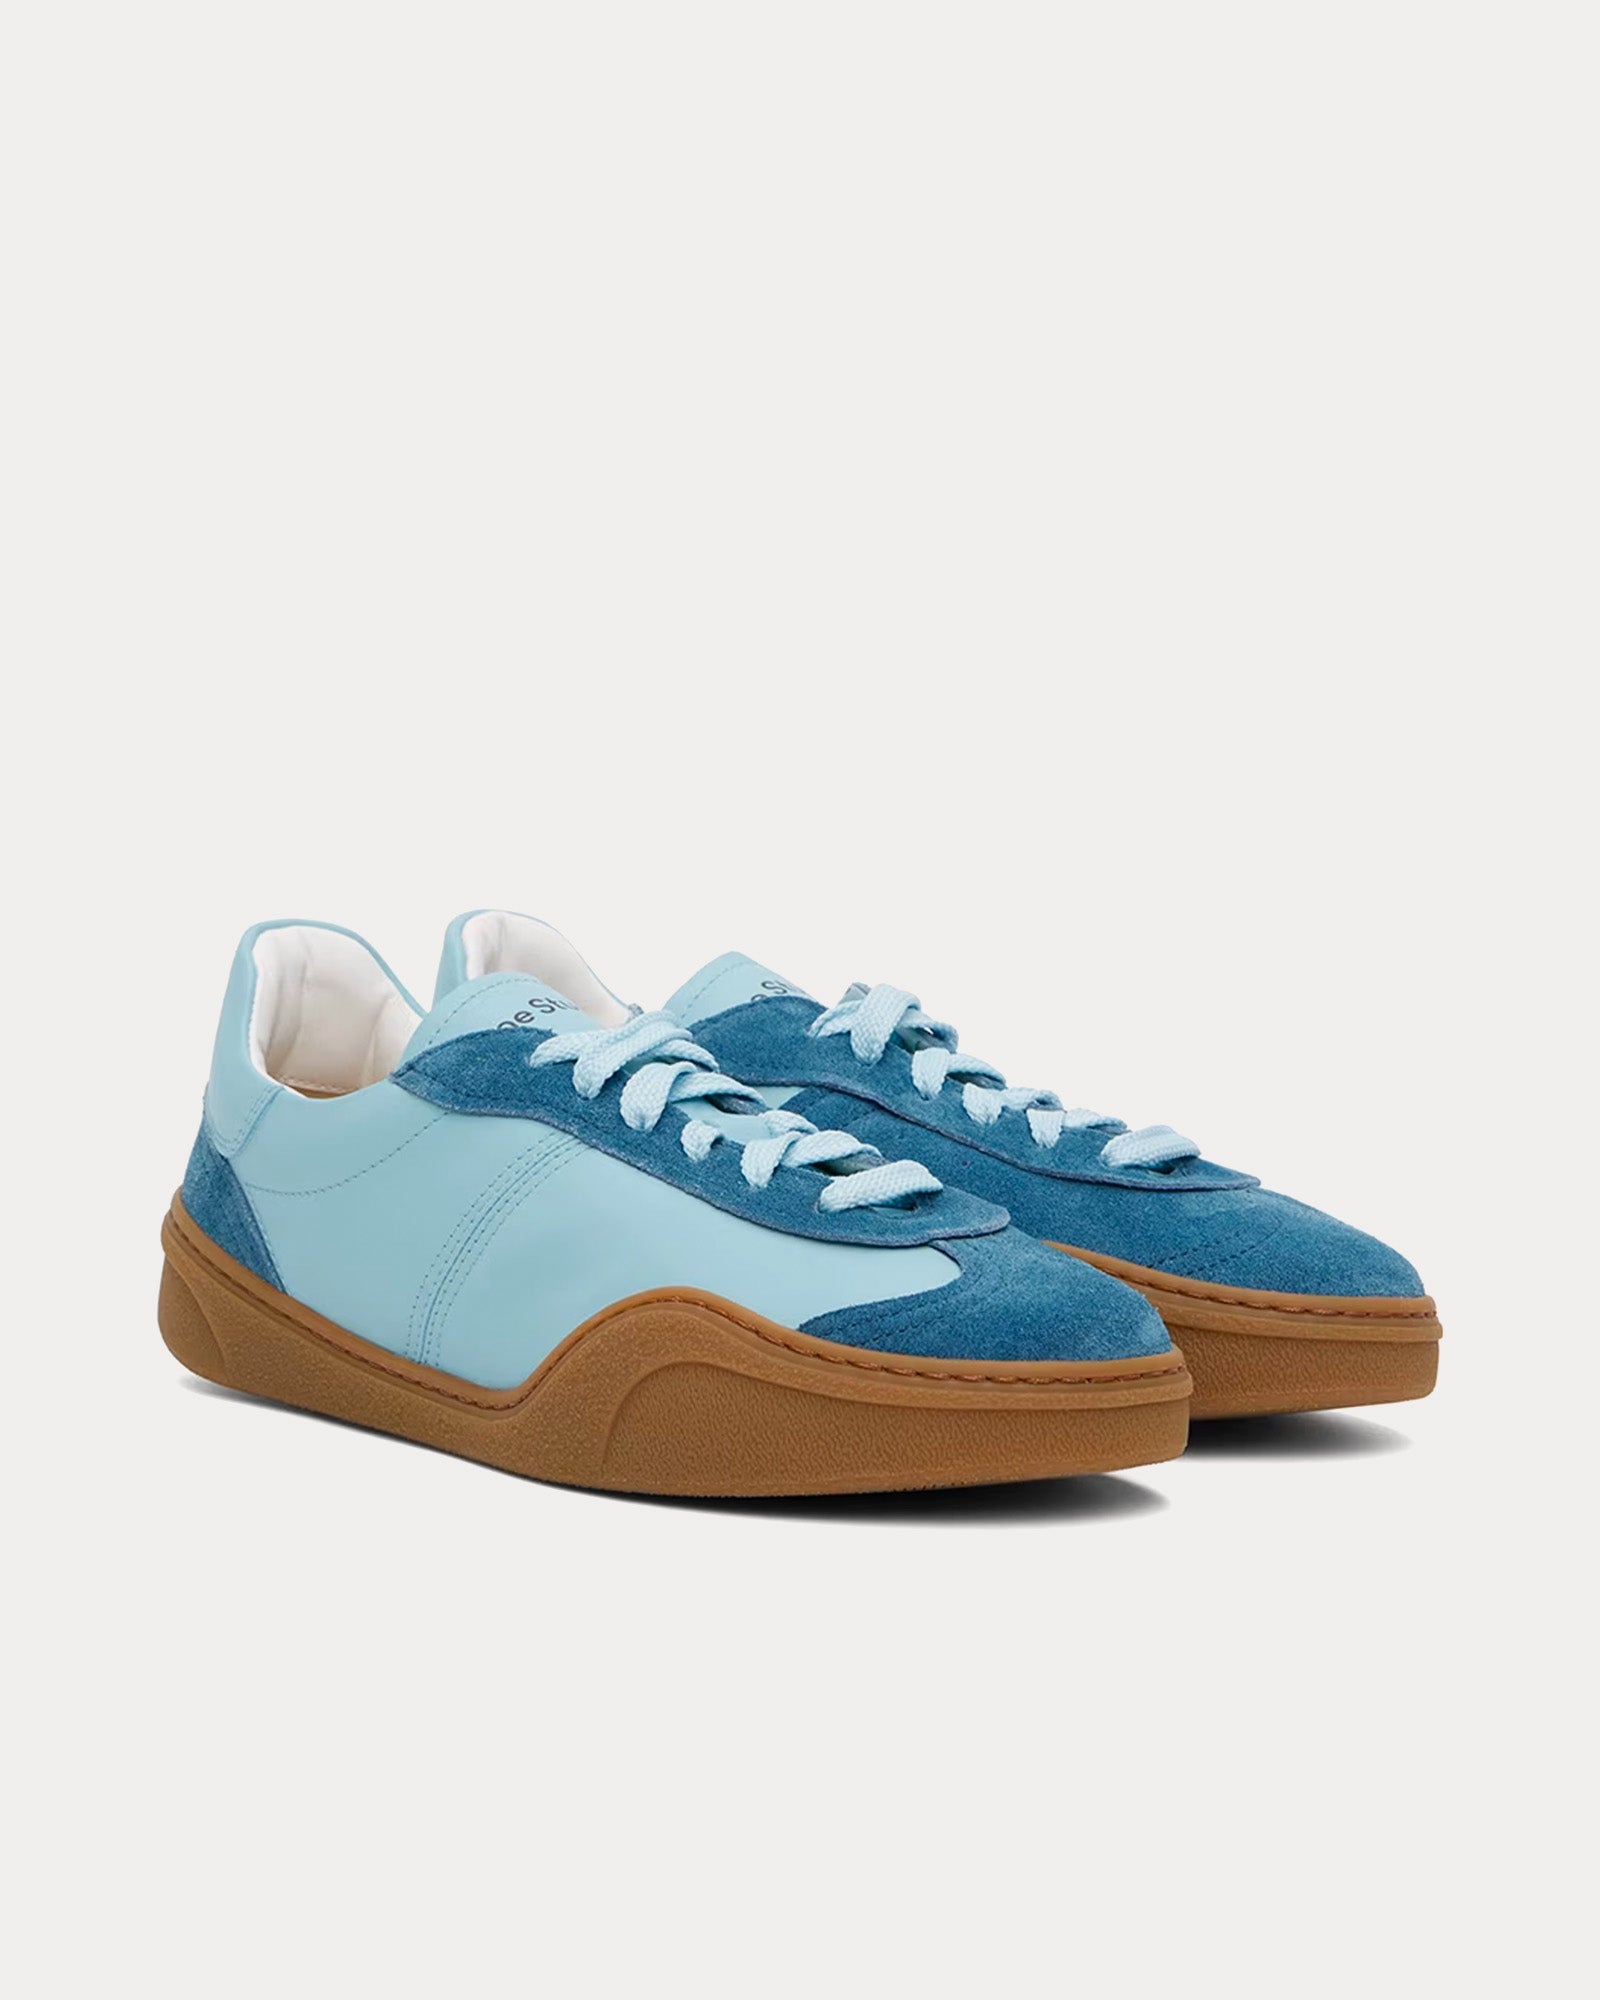 Acne Studios - Bars Lace-Up Light Blue / Brown Low Top Sneakers